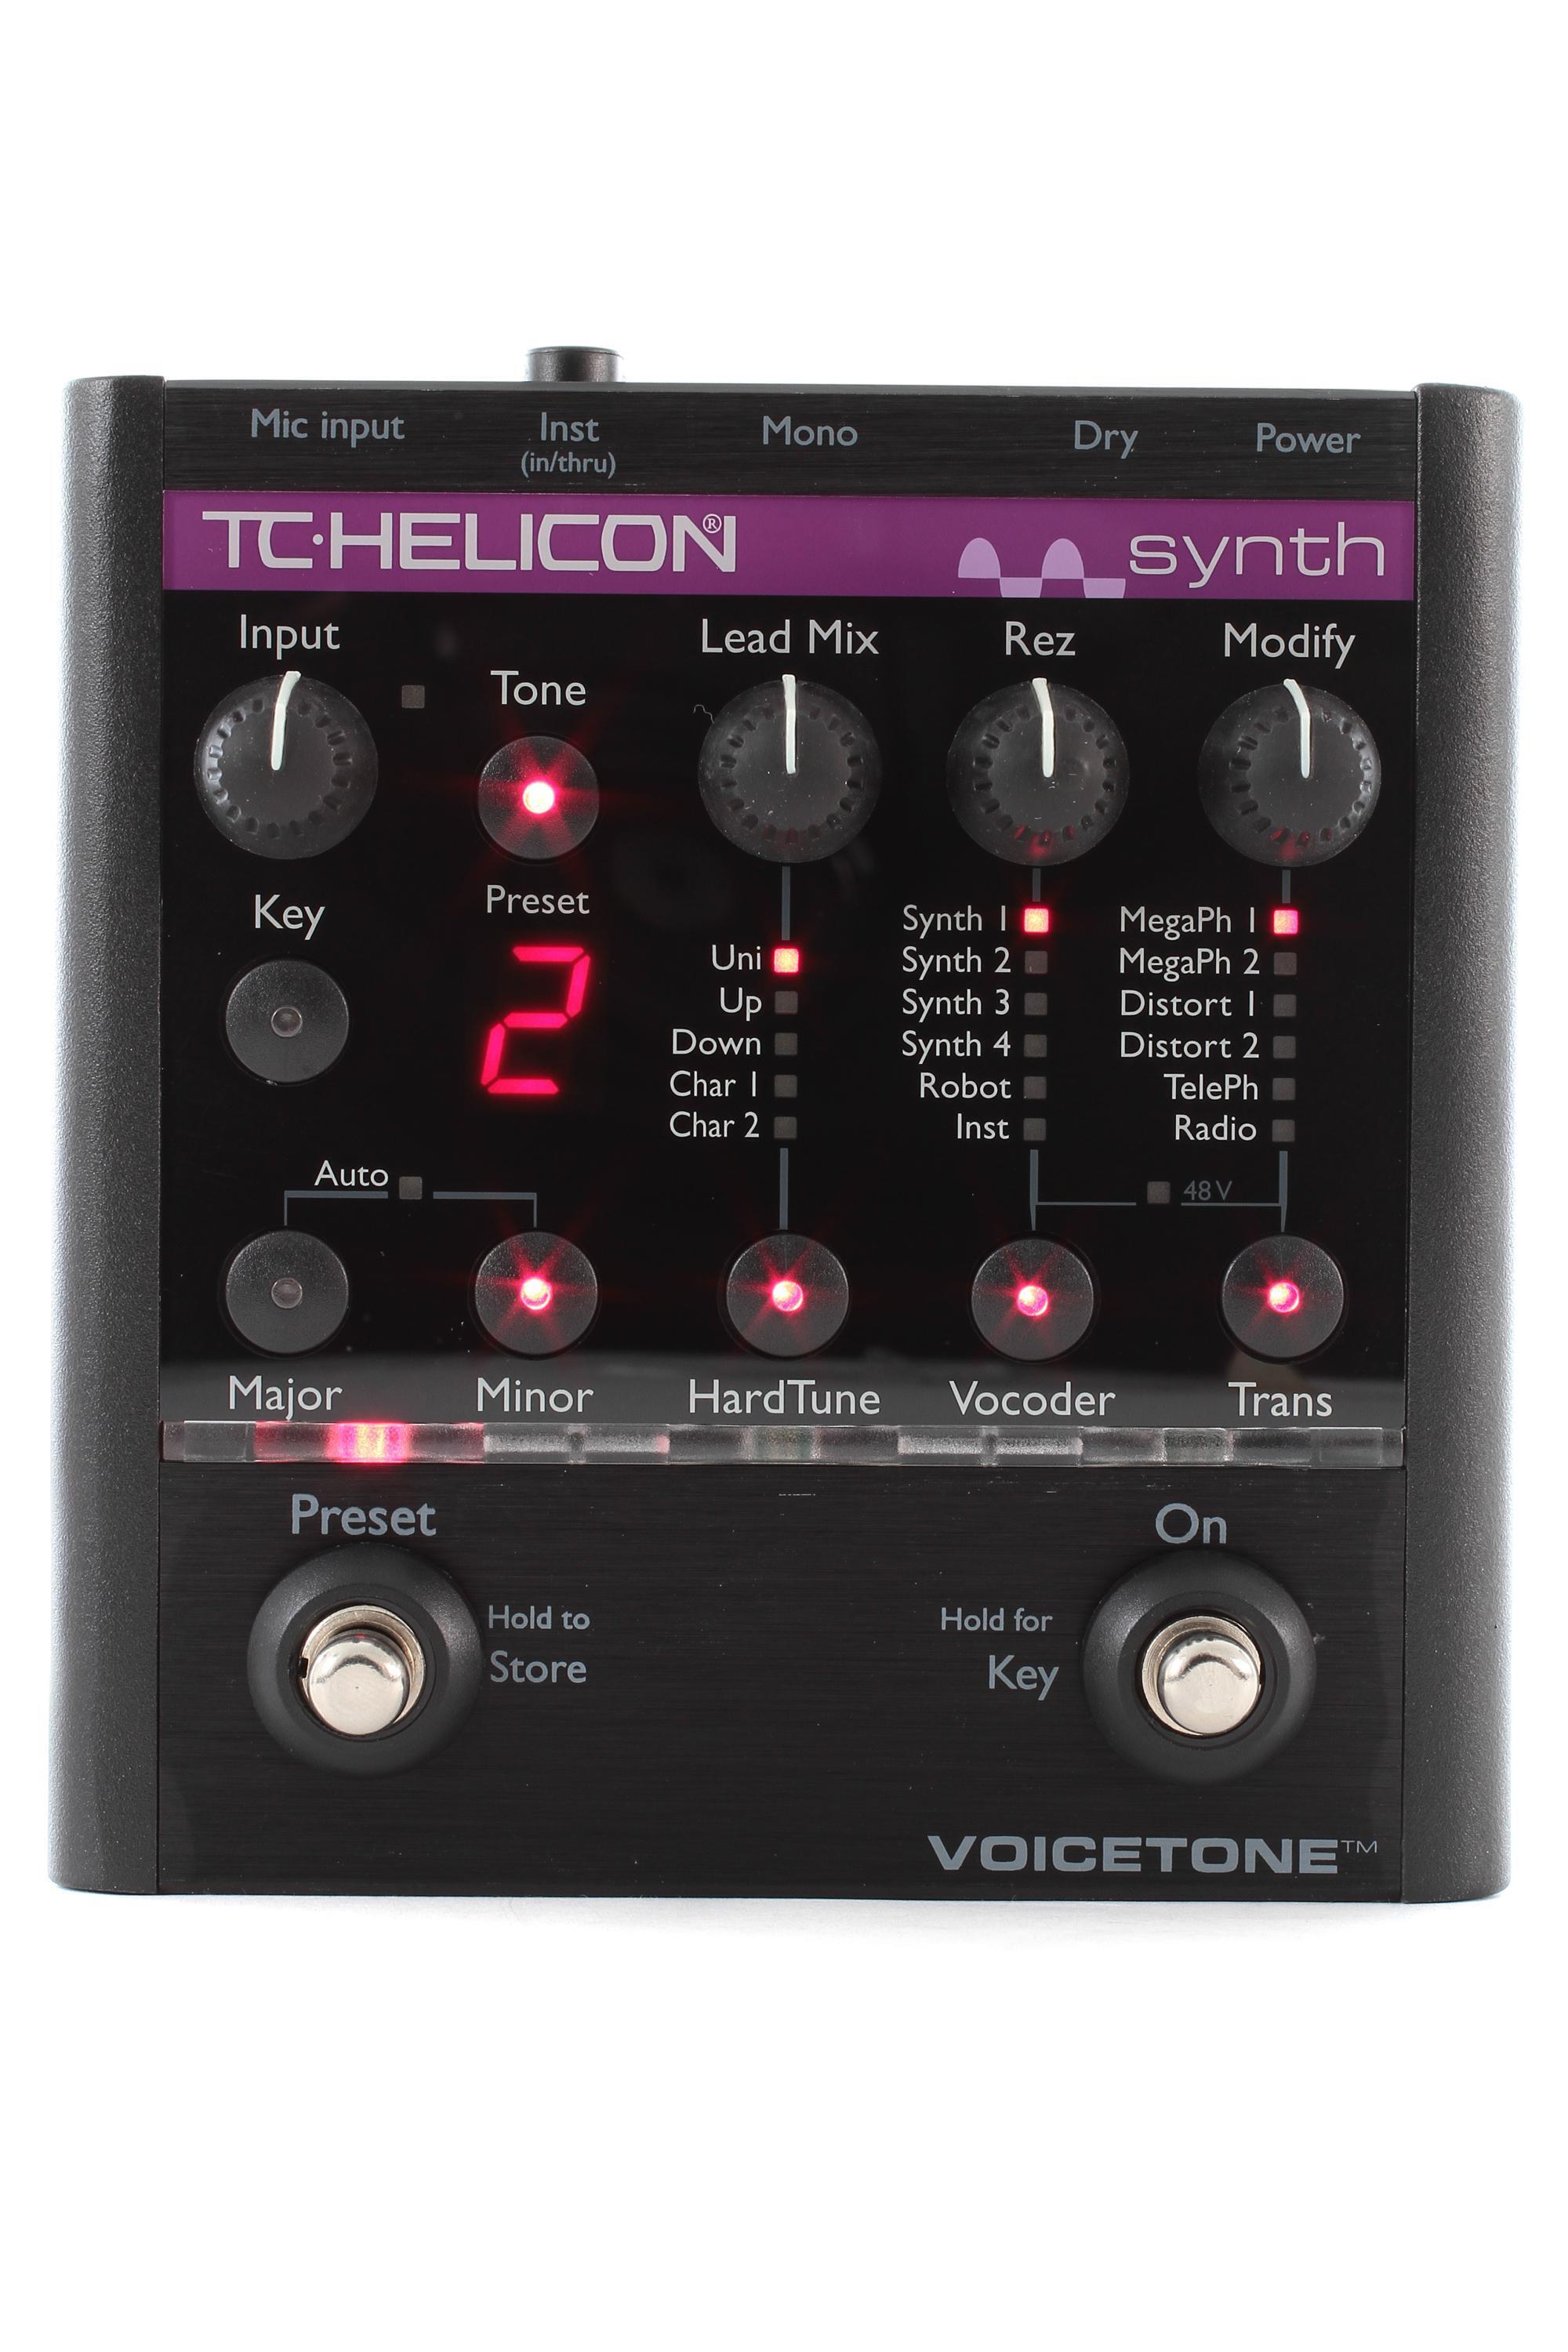 TC-Helicon VoiceTone Synth | Sweetwater